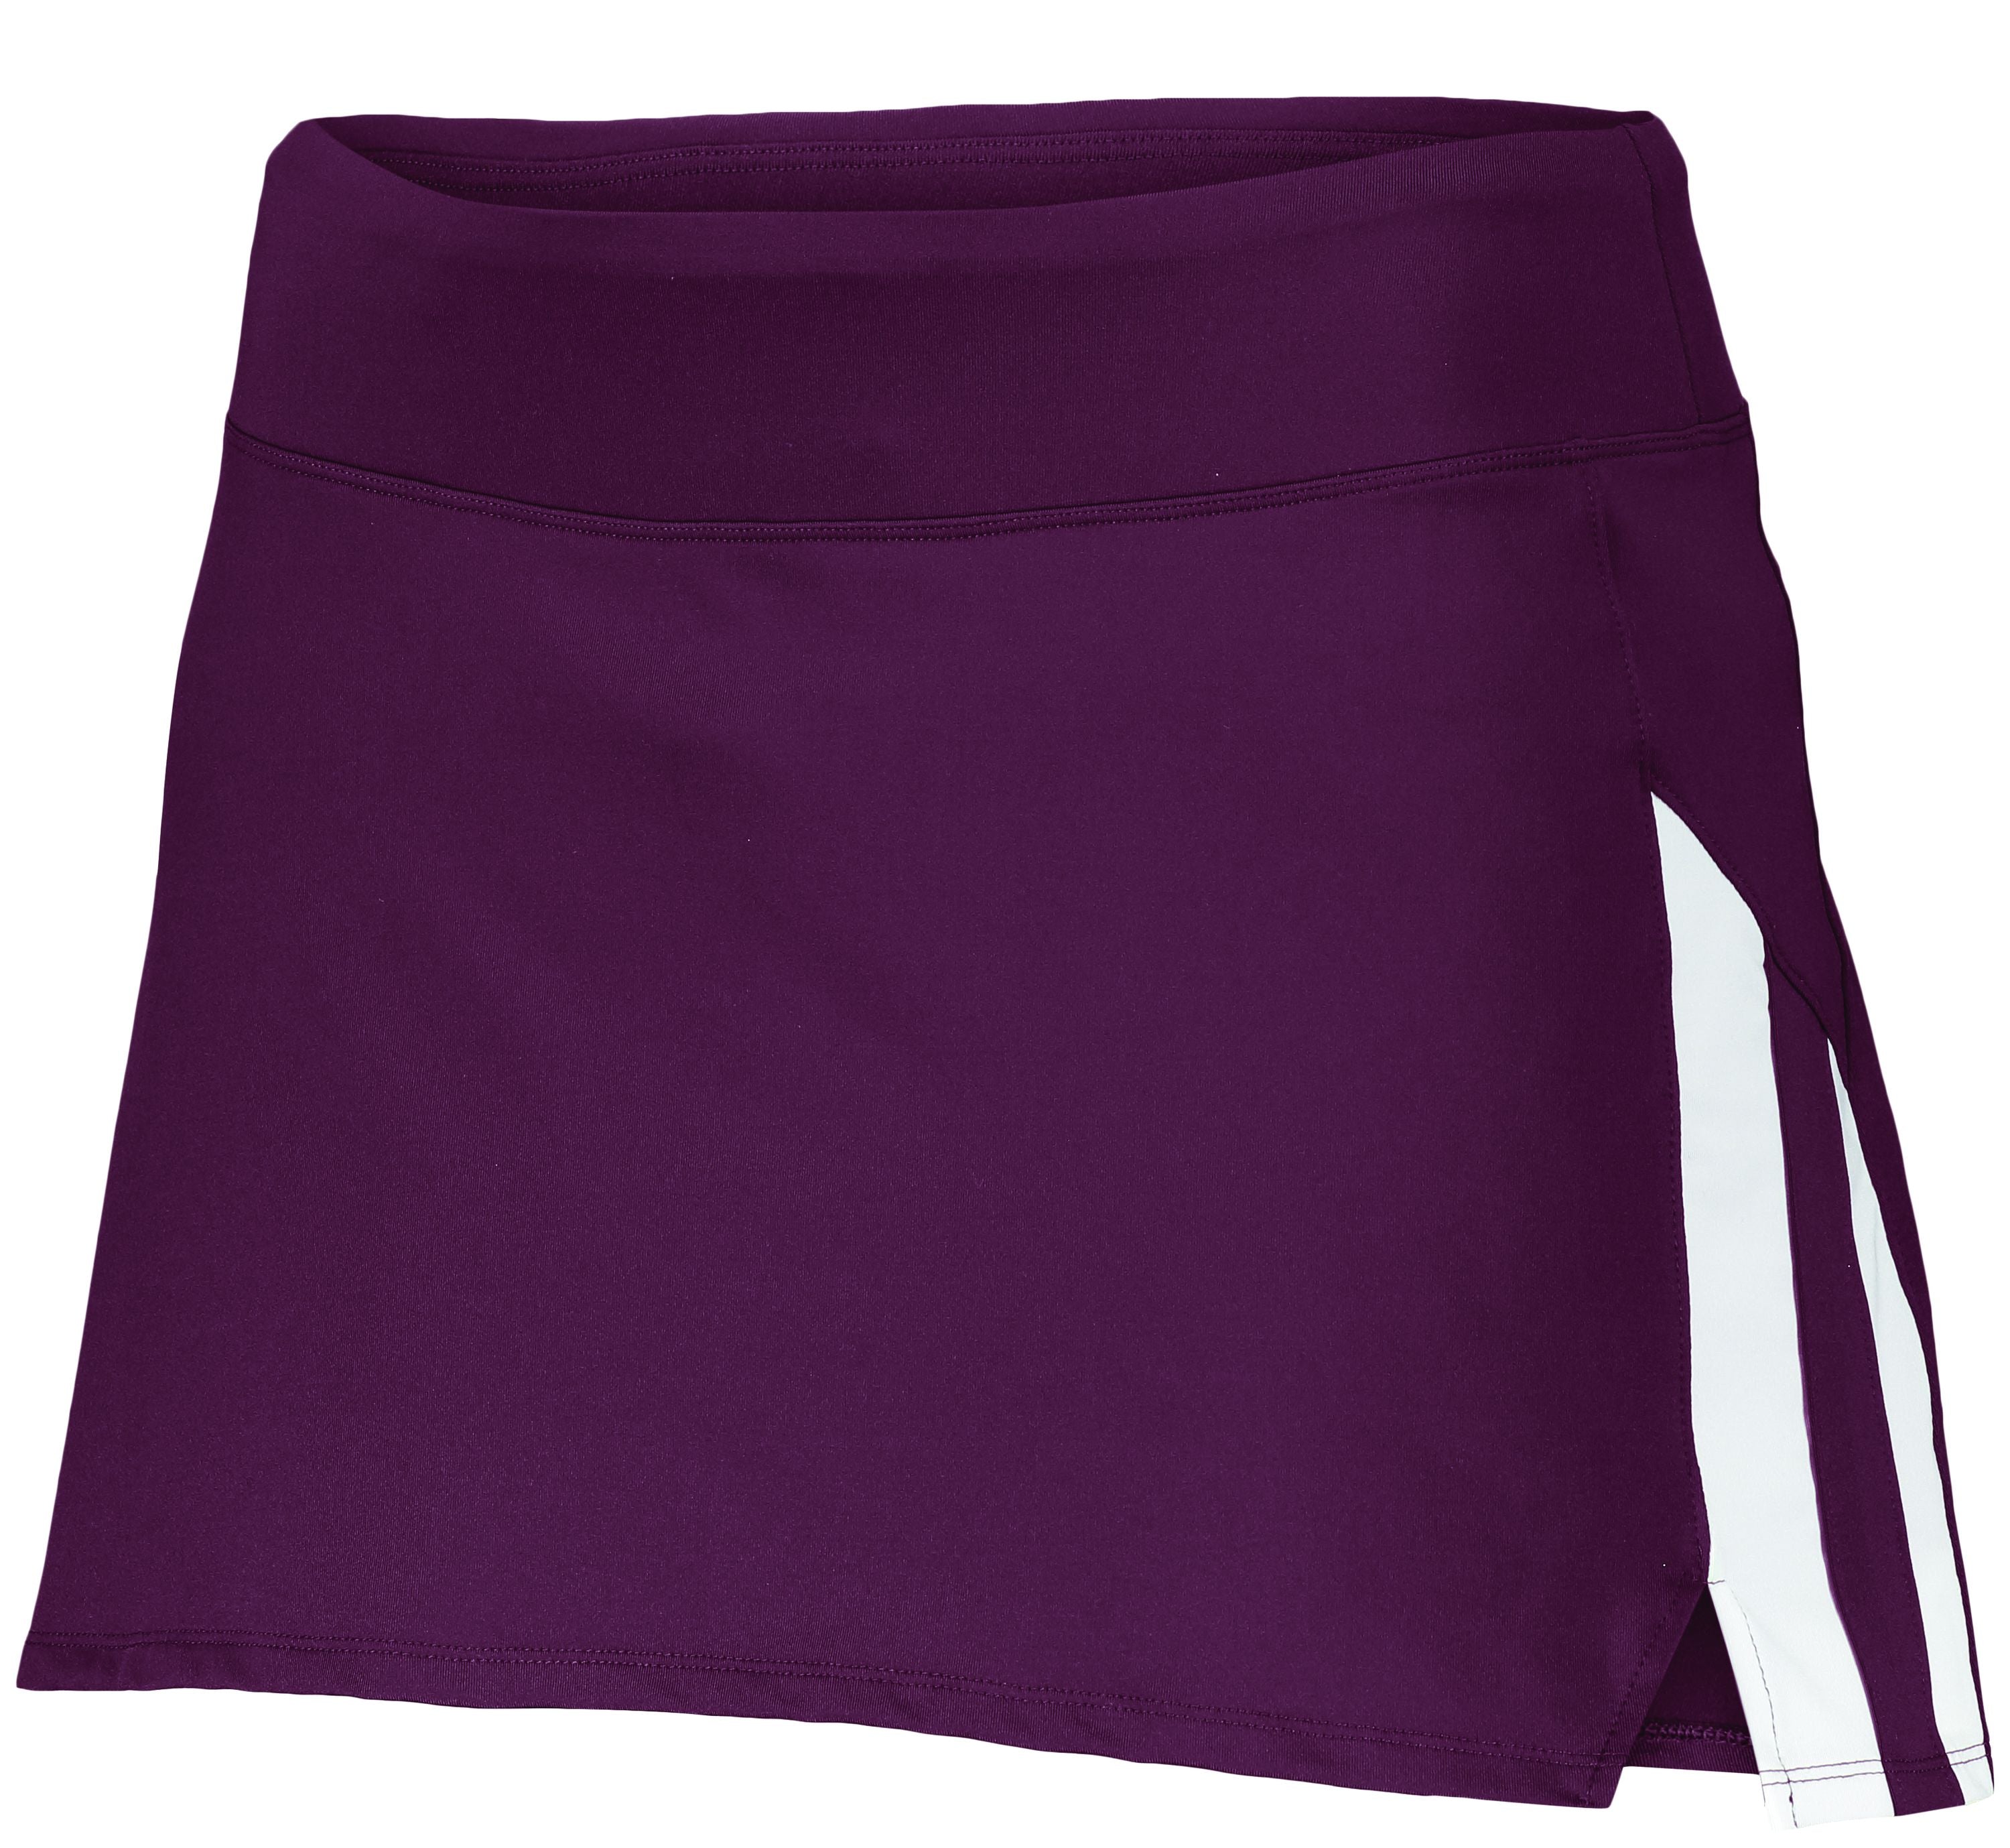 Augusta Sportswear Girls Full Force Skort in Maroon/White  -Part of the Girls, Augusta-Products product lines at KanaleyCreations.com